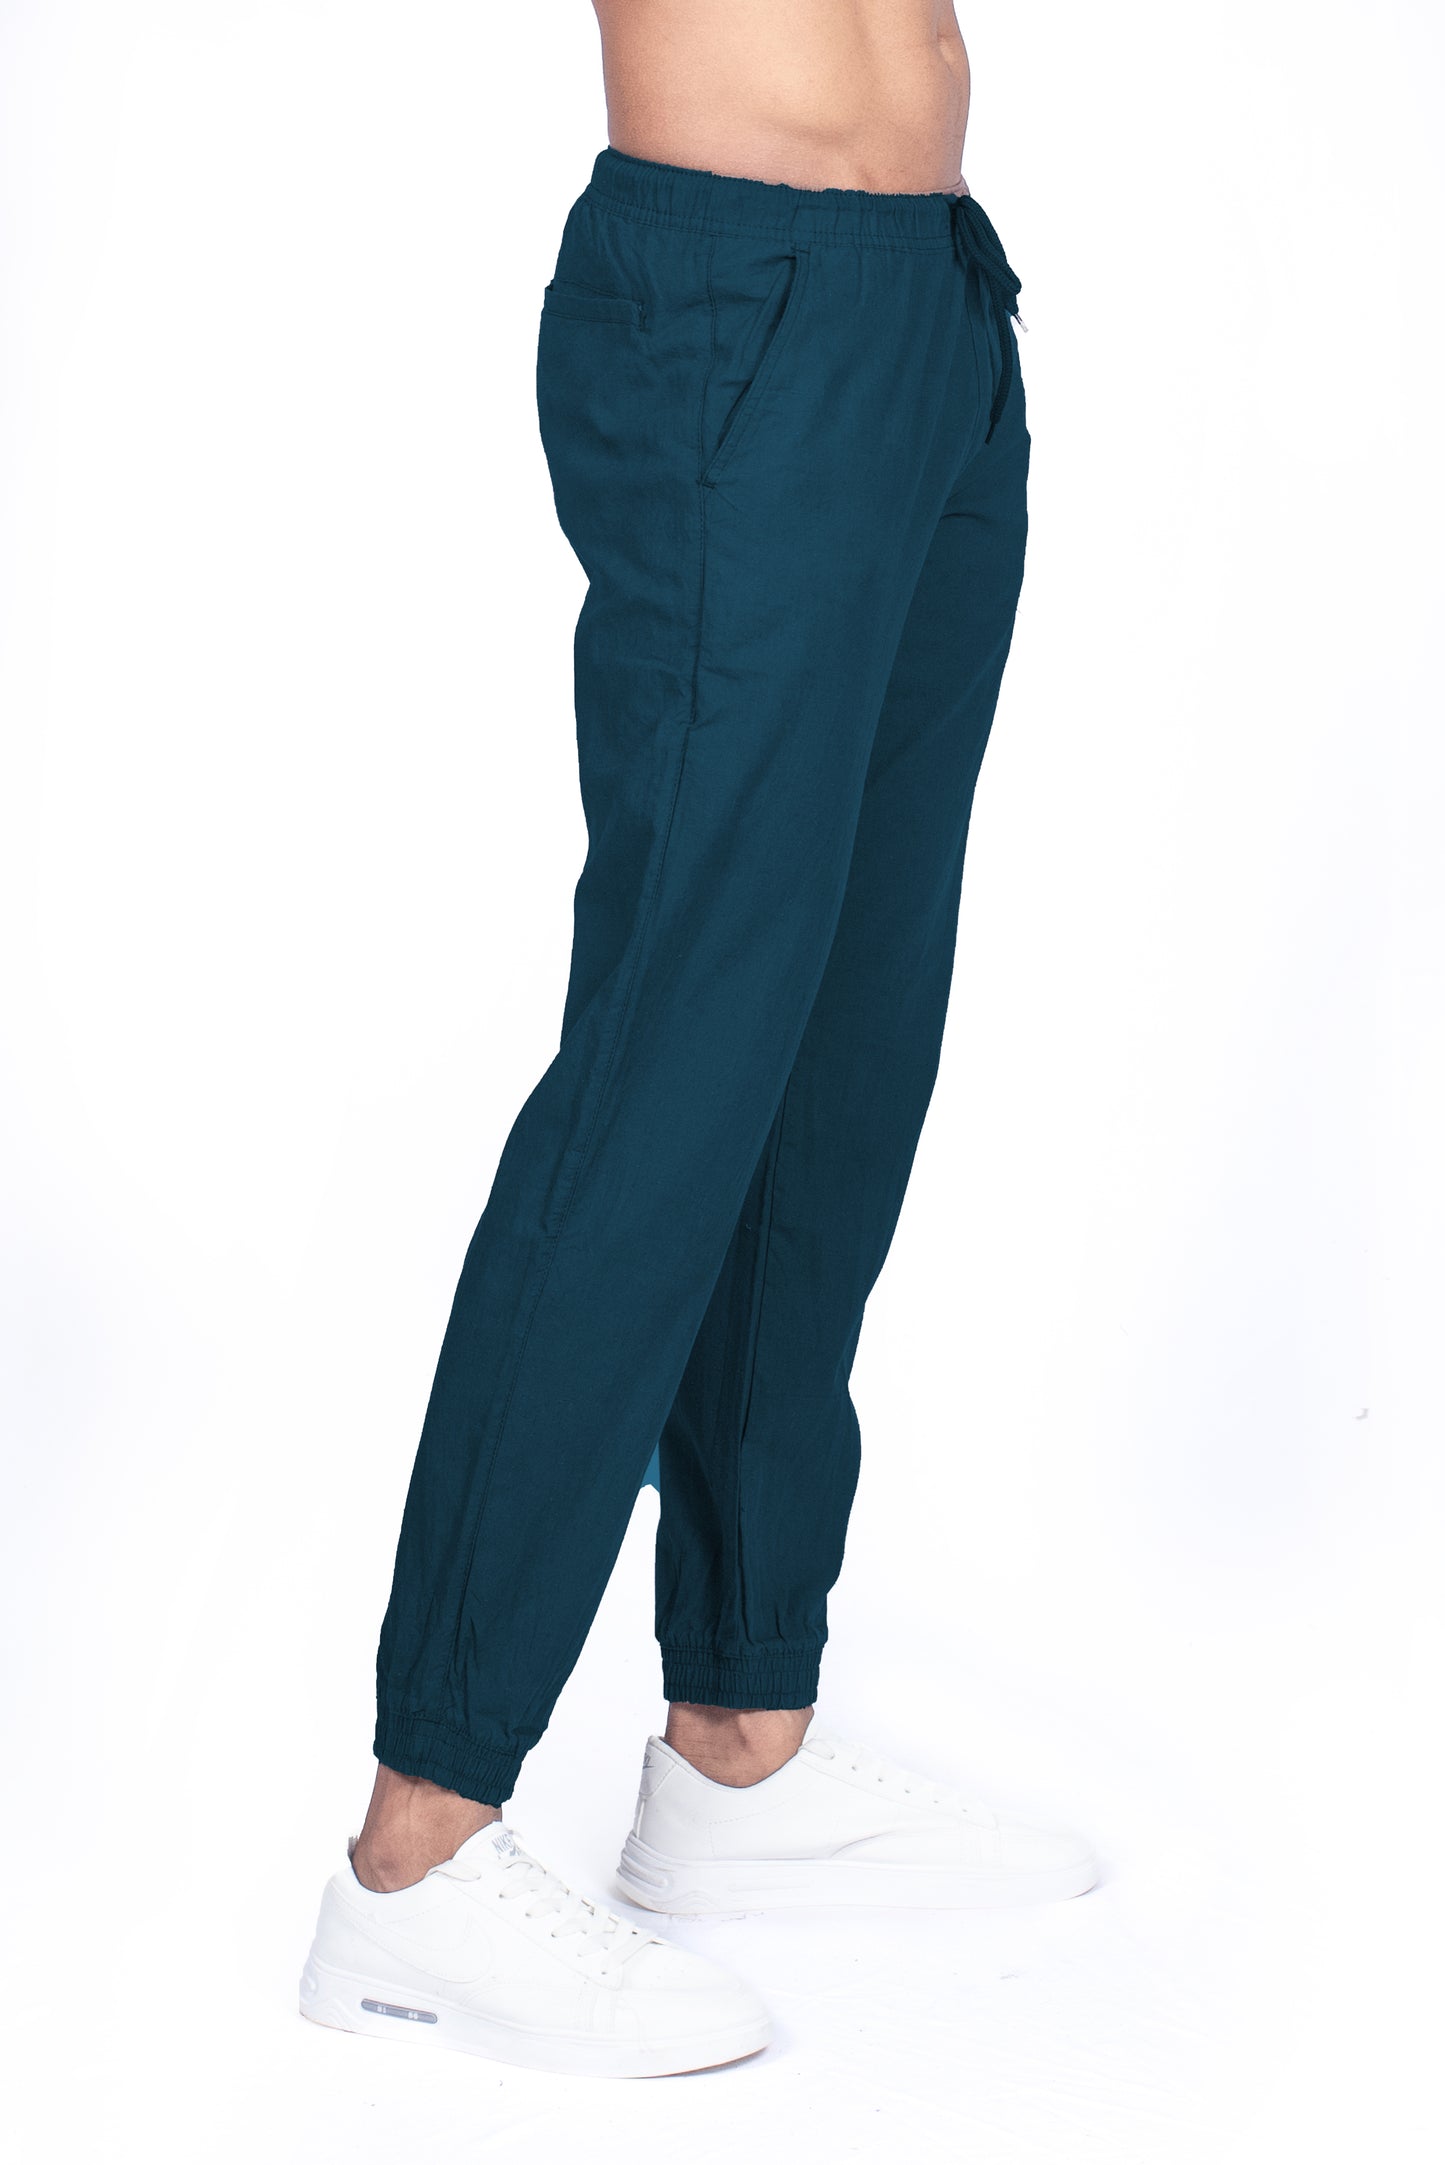 Men's Jogger Pant - Forest Green